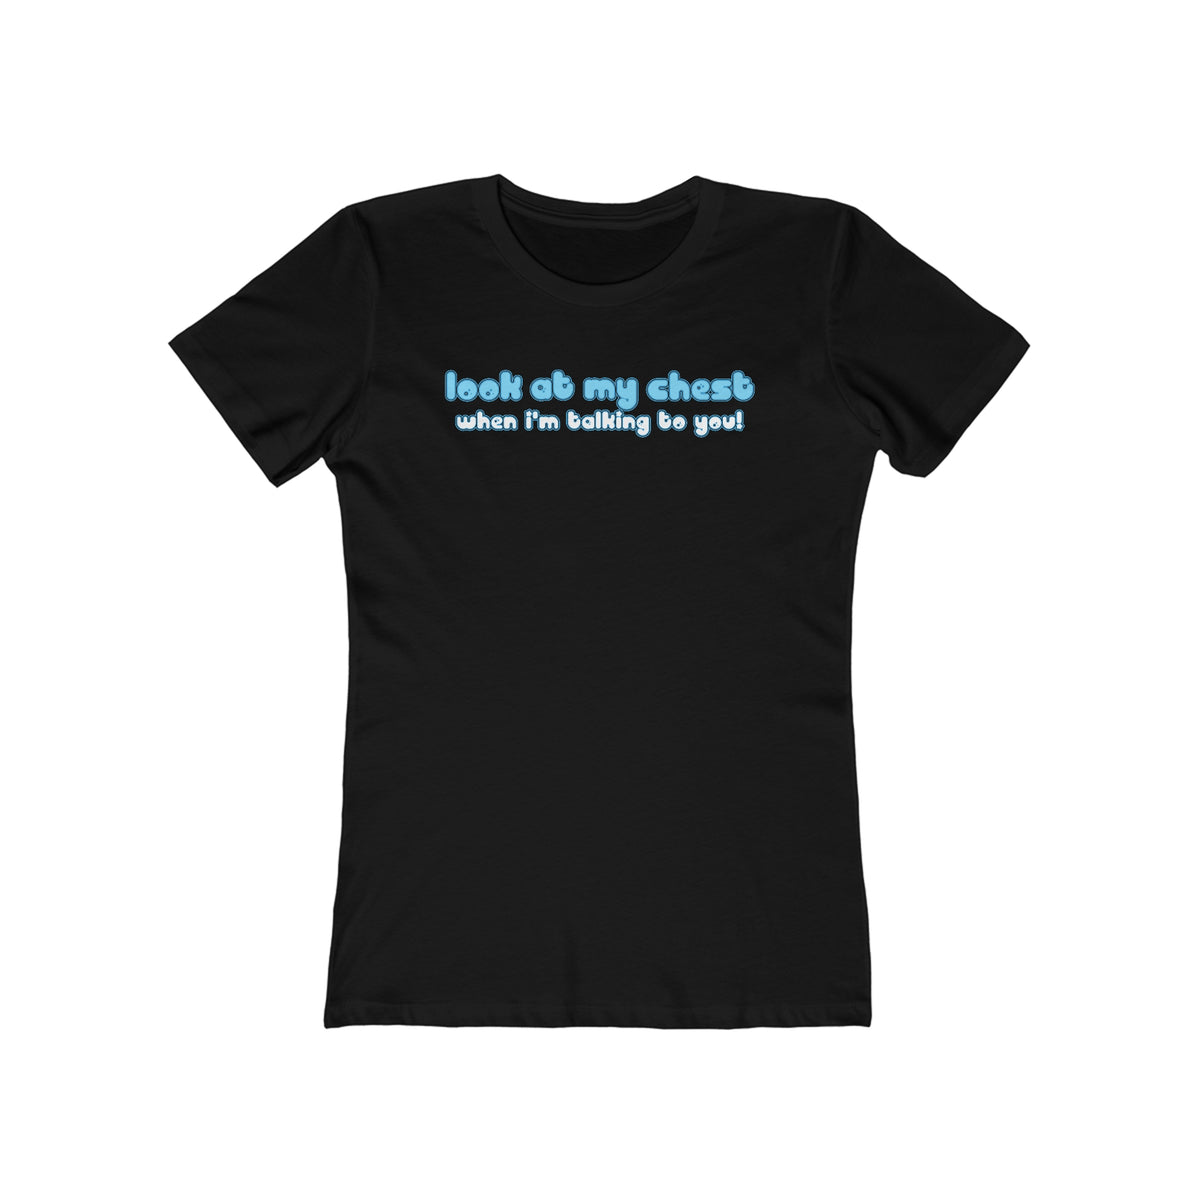 Look At My Chest When You're Talking To Me - Women’s T-Shirt